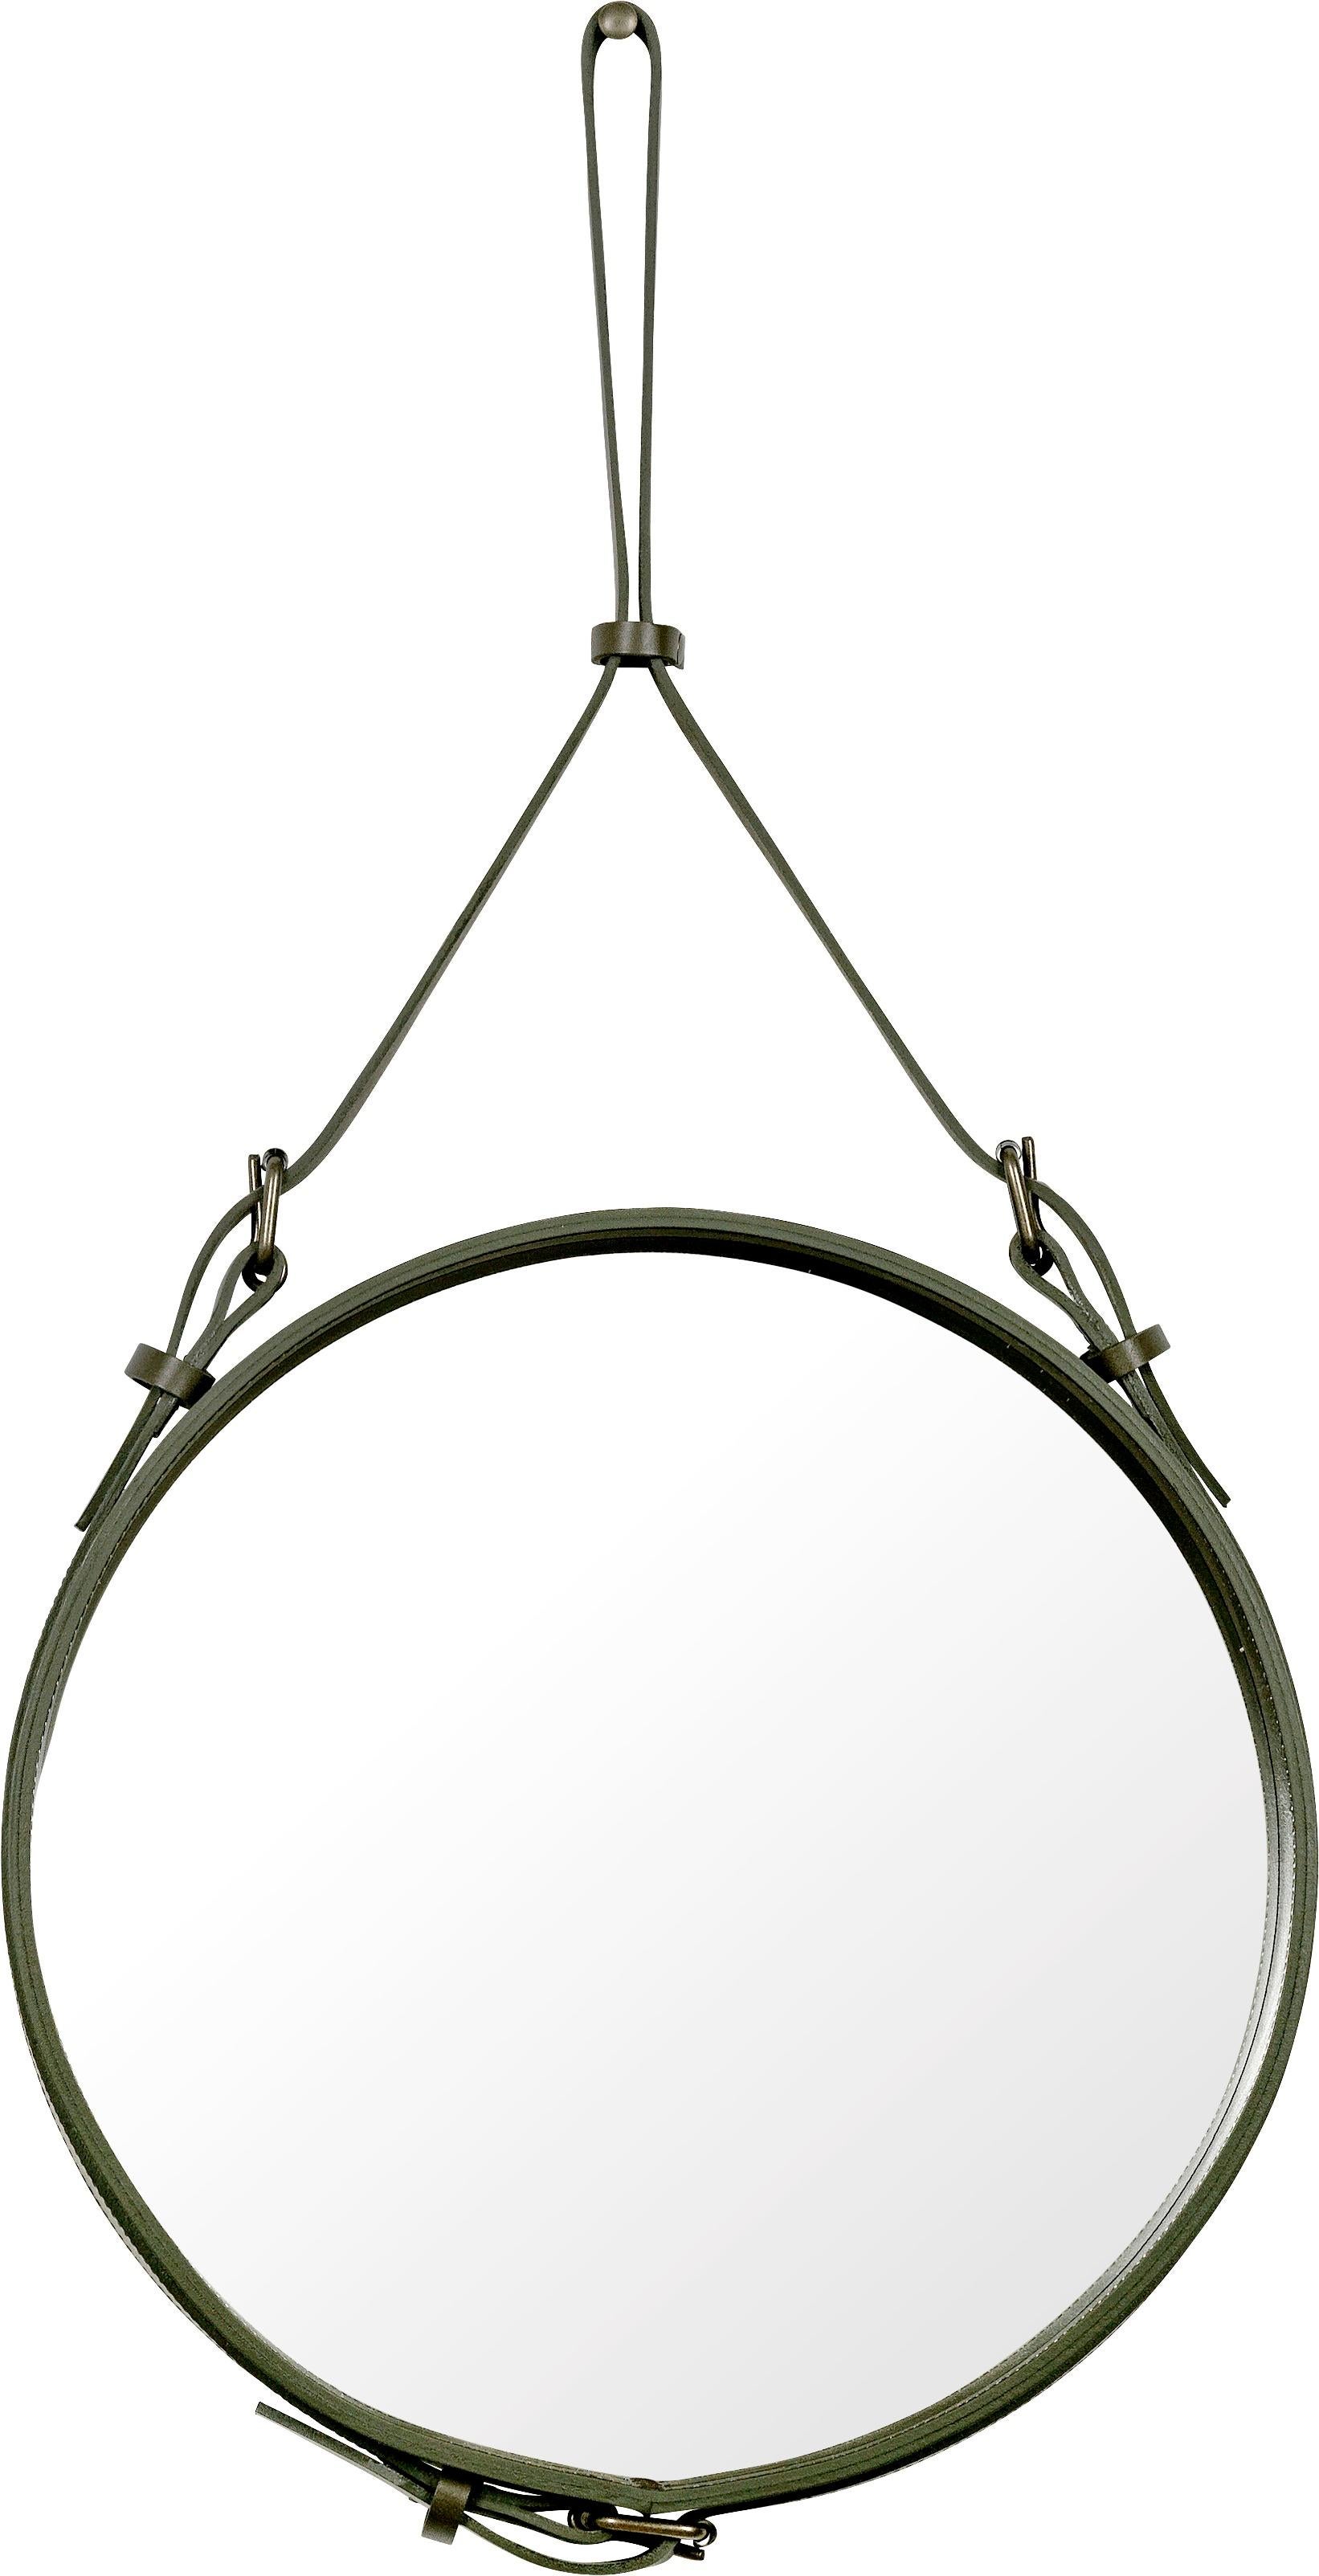 Brass Jacques Adnet Small Circulaire Mirror with Black Leather For Sale